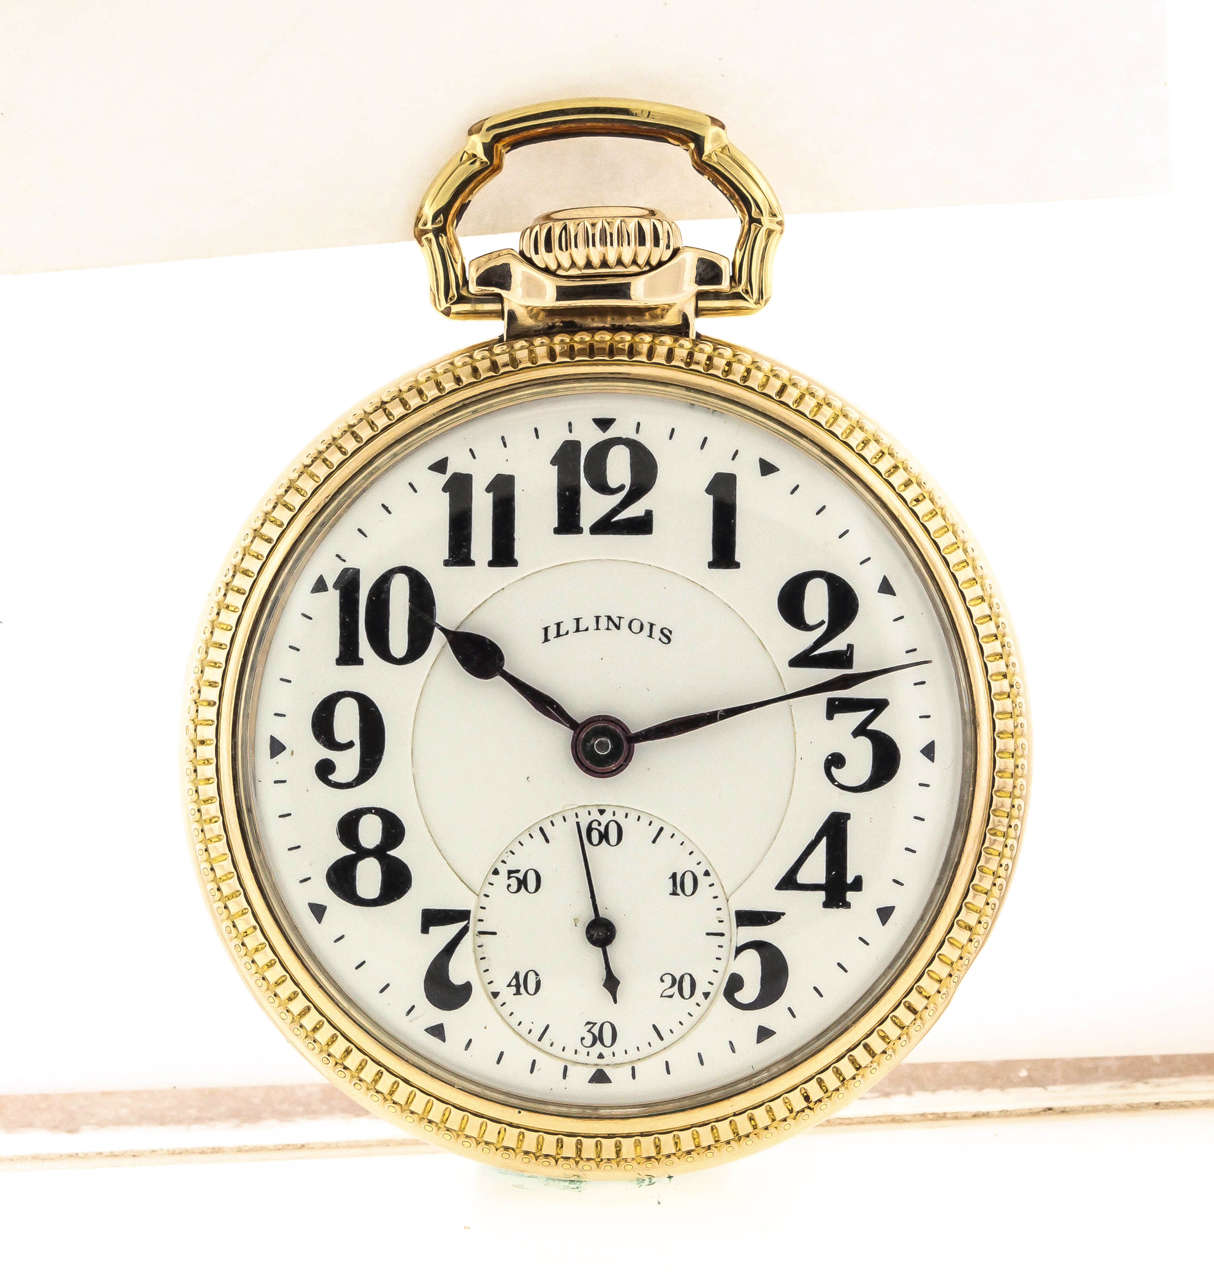 Gold-filled Illinois Bunn Special pocket watch, circa 1927. The 51mm case has a screw bezel and back, by Wadsworth. The white enamel dial features bold Arabic numerals, outer minute ring, subsidiary seconds, and blued steel spade hands. The movement